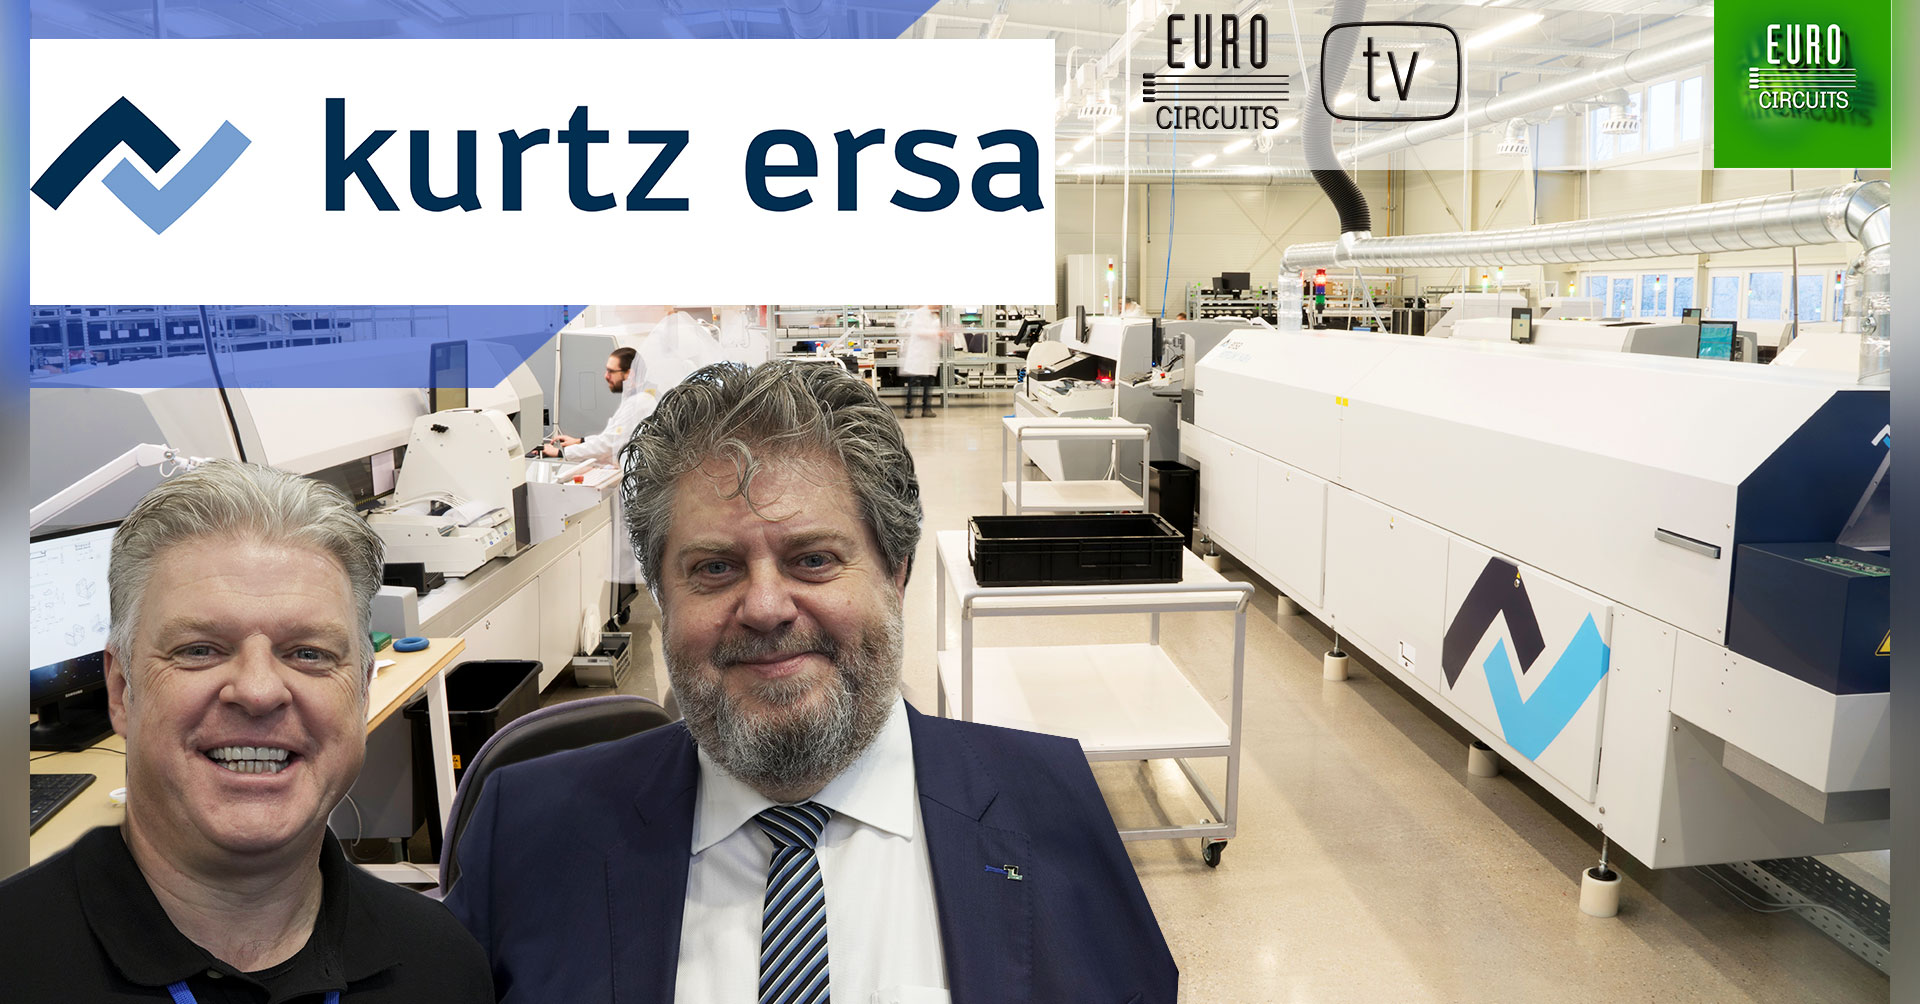 Our reflow ovens come from Kurtz Ersa